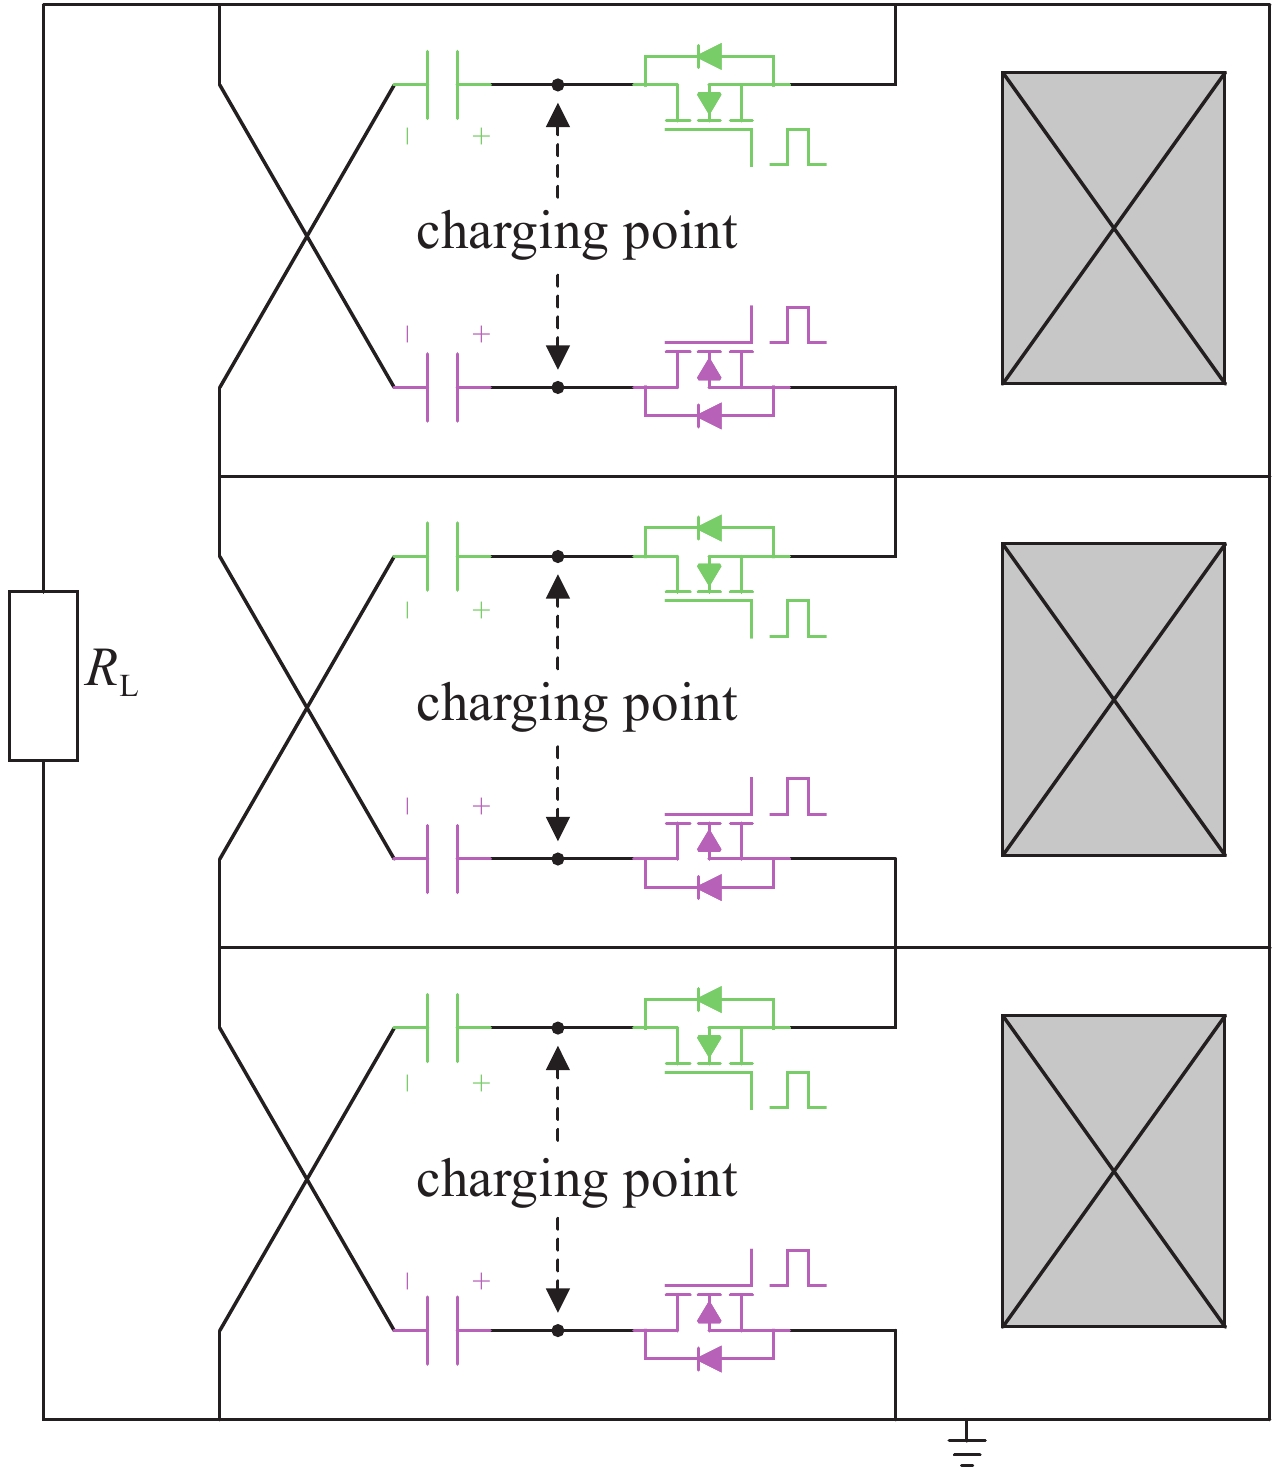 Topology of solid-state bipolar LTD pulse generator equivalent circuit